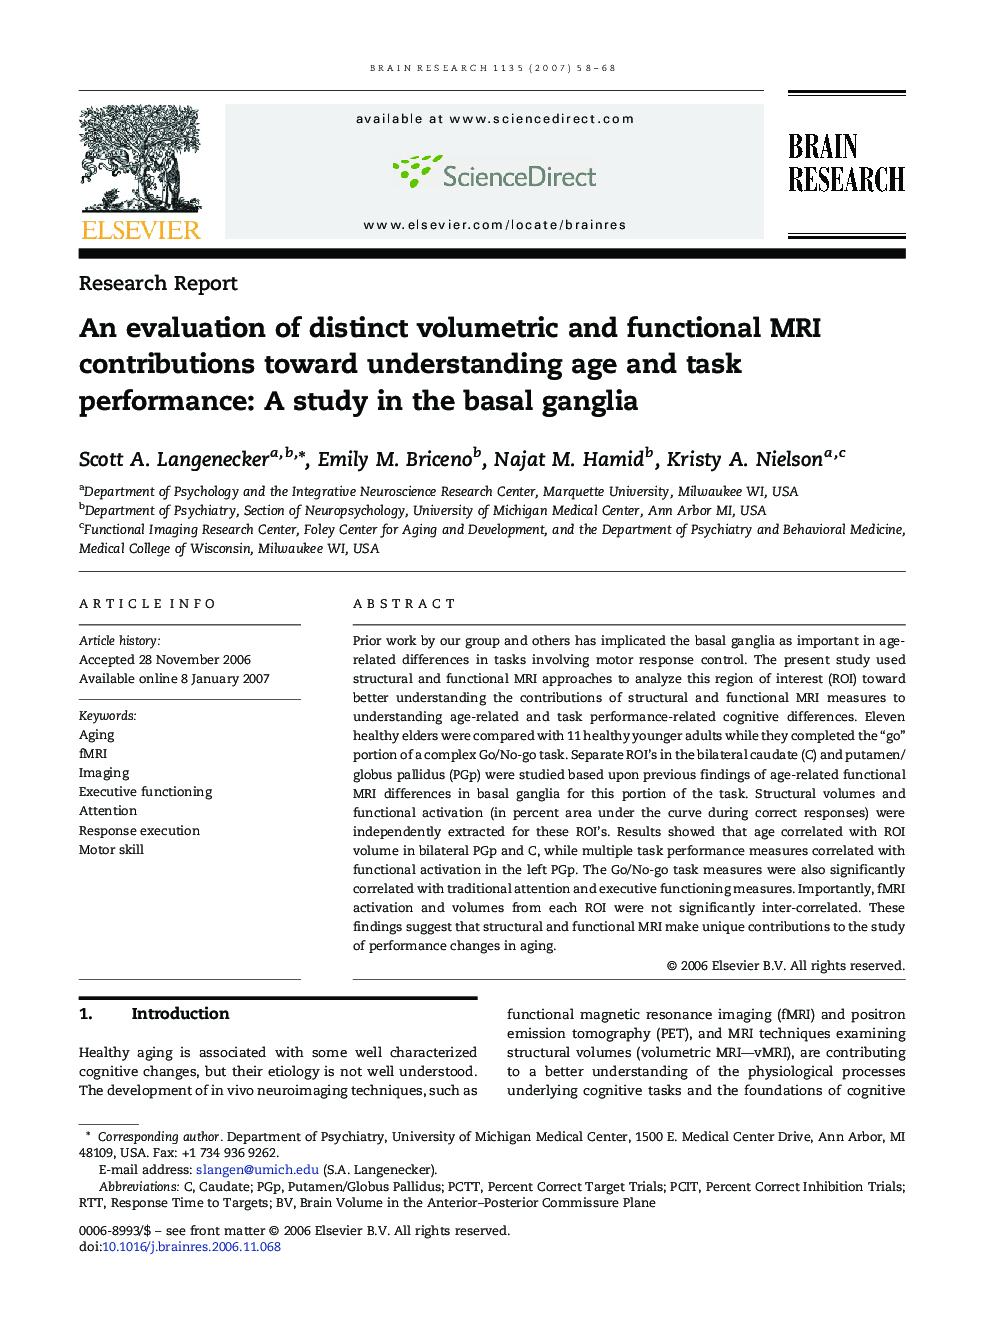 Research ReportAn evaluation of distinct volumetric and functional MRI contributions toward understanding age and task performance: A study in the basal ganglia